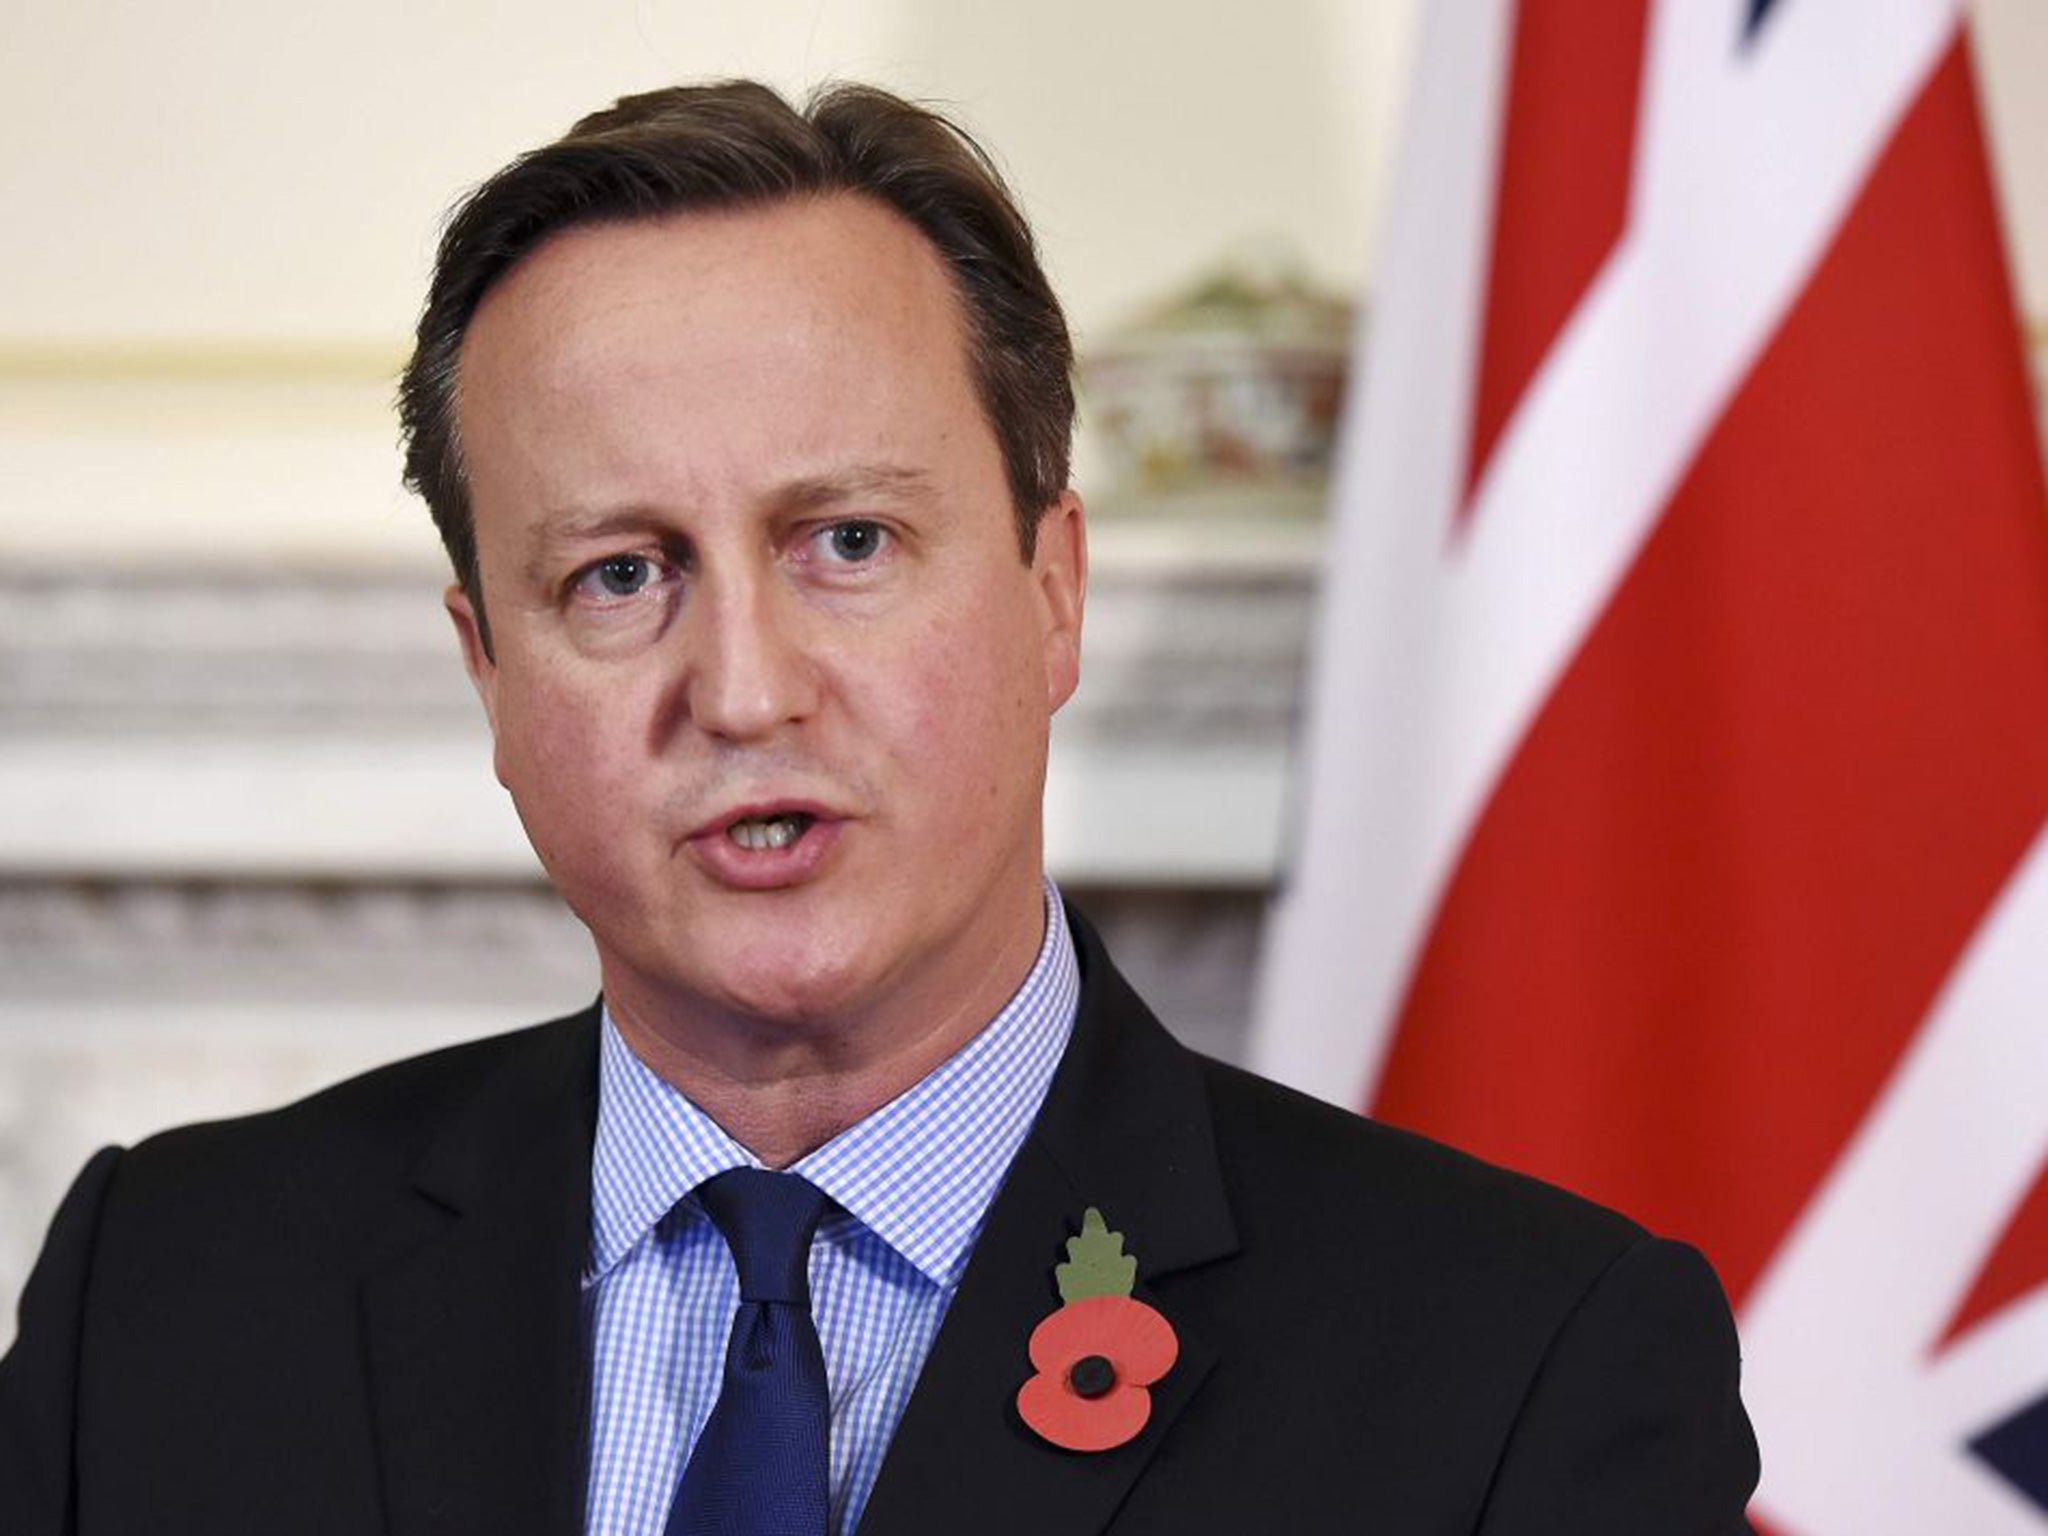 Cameron will say "if and when” he achieves an agreement, he will campaign to keep Britain inside a “reformed” EU